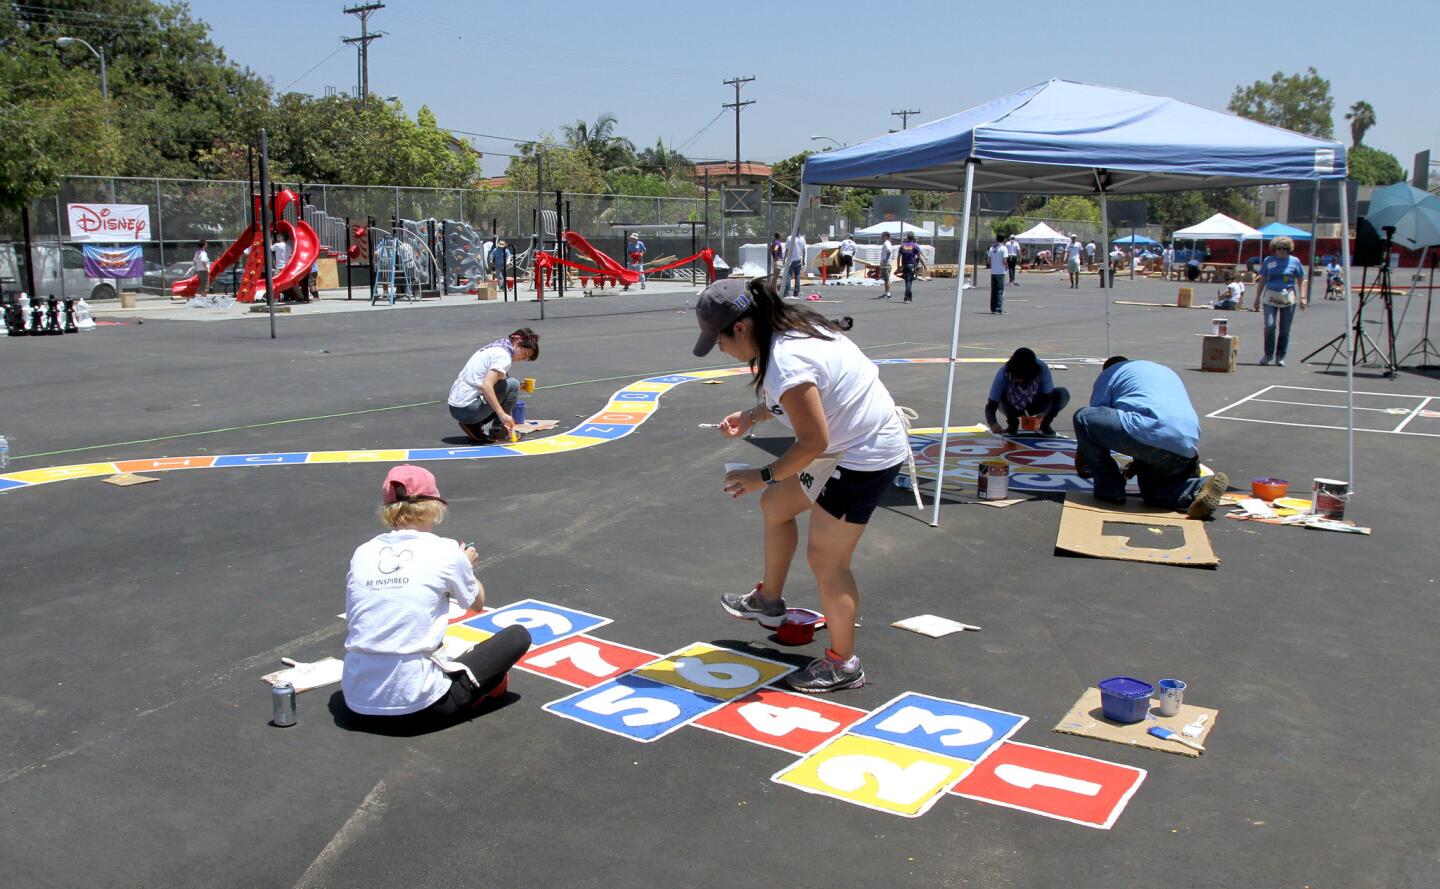 Photo Gallery: Kaboom, Disney and Glendale Educational Foundation team up to improve Mann Elementary School